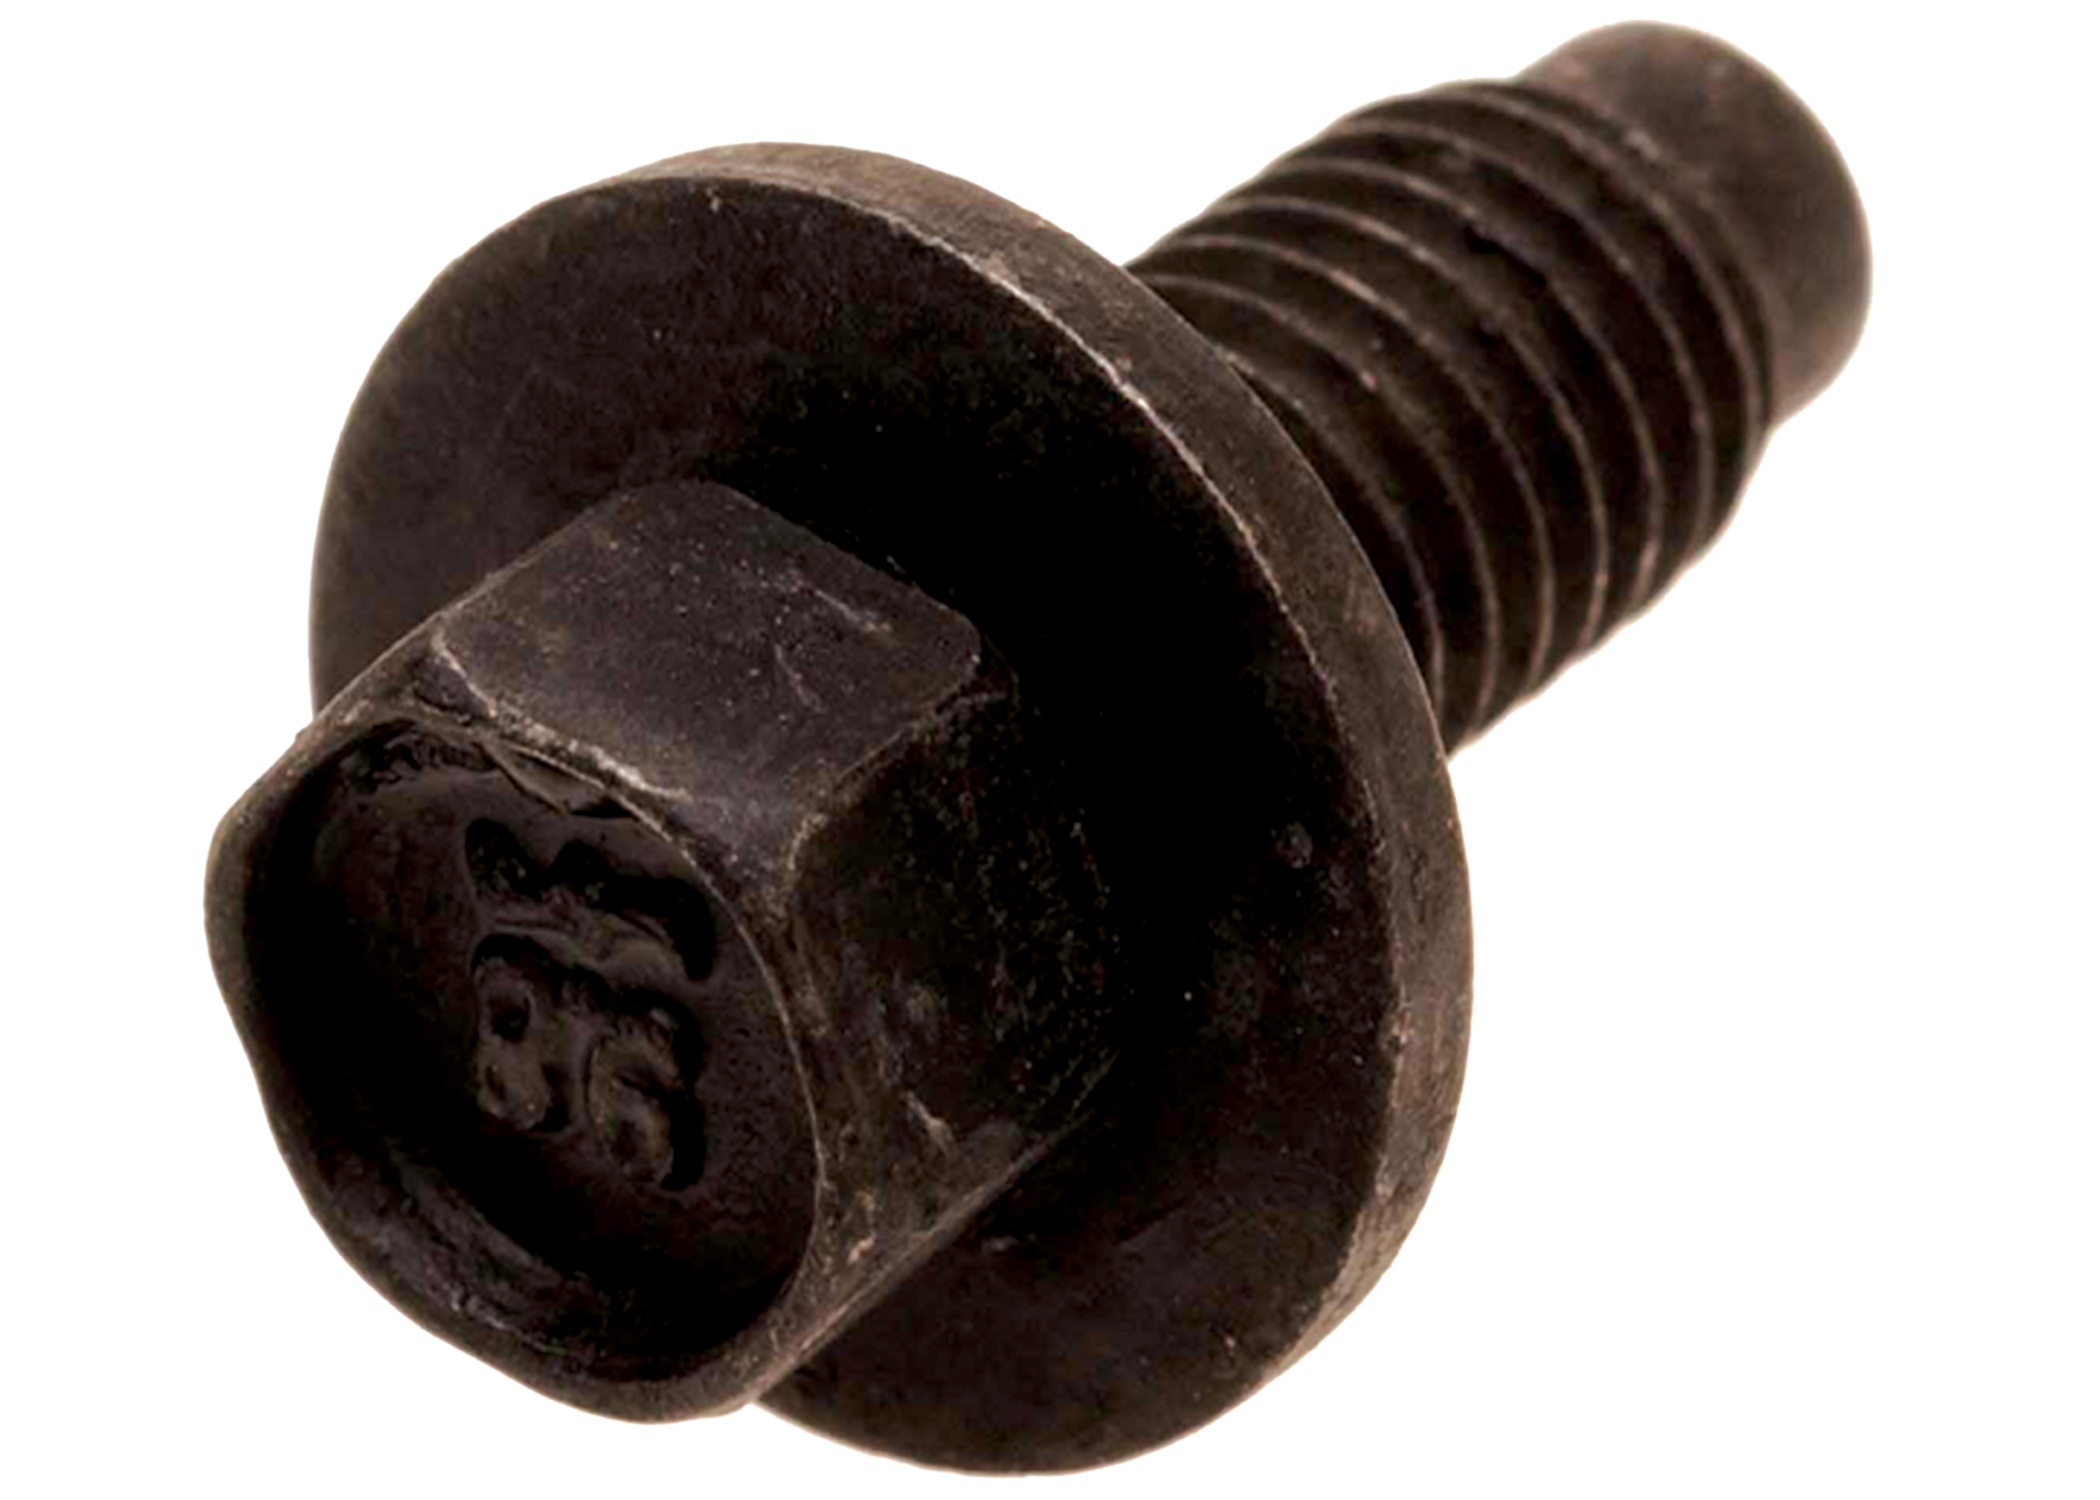 GM GENUINE PARTS - Engine Timing Chain Guide Bolt - GMP 15614709